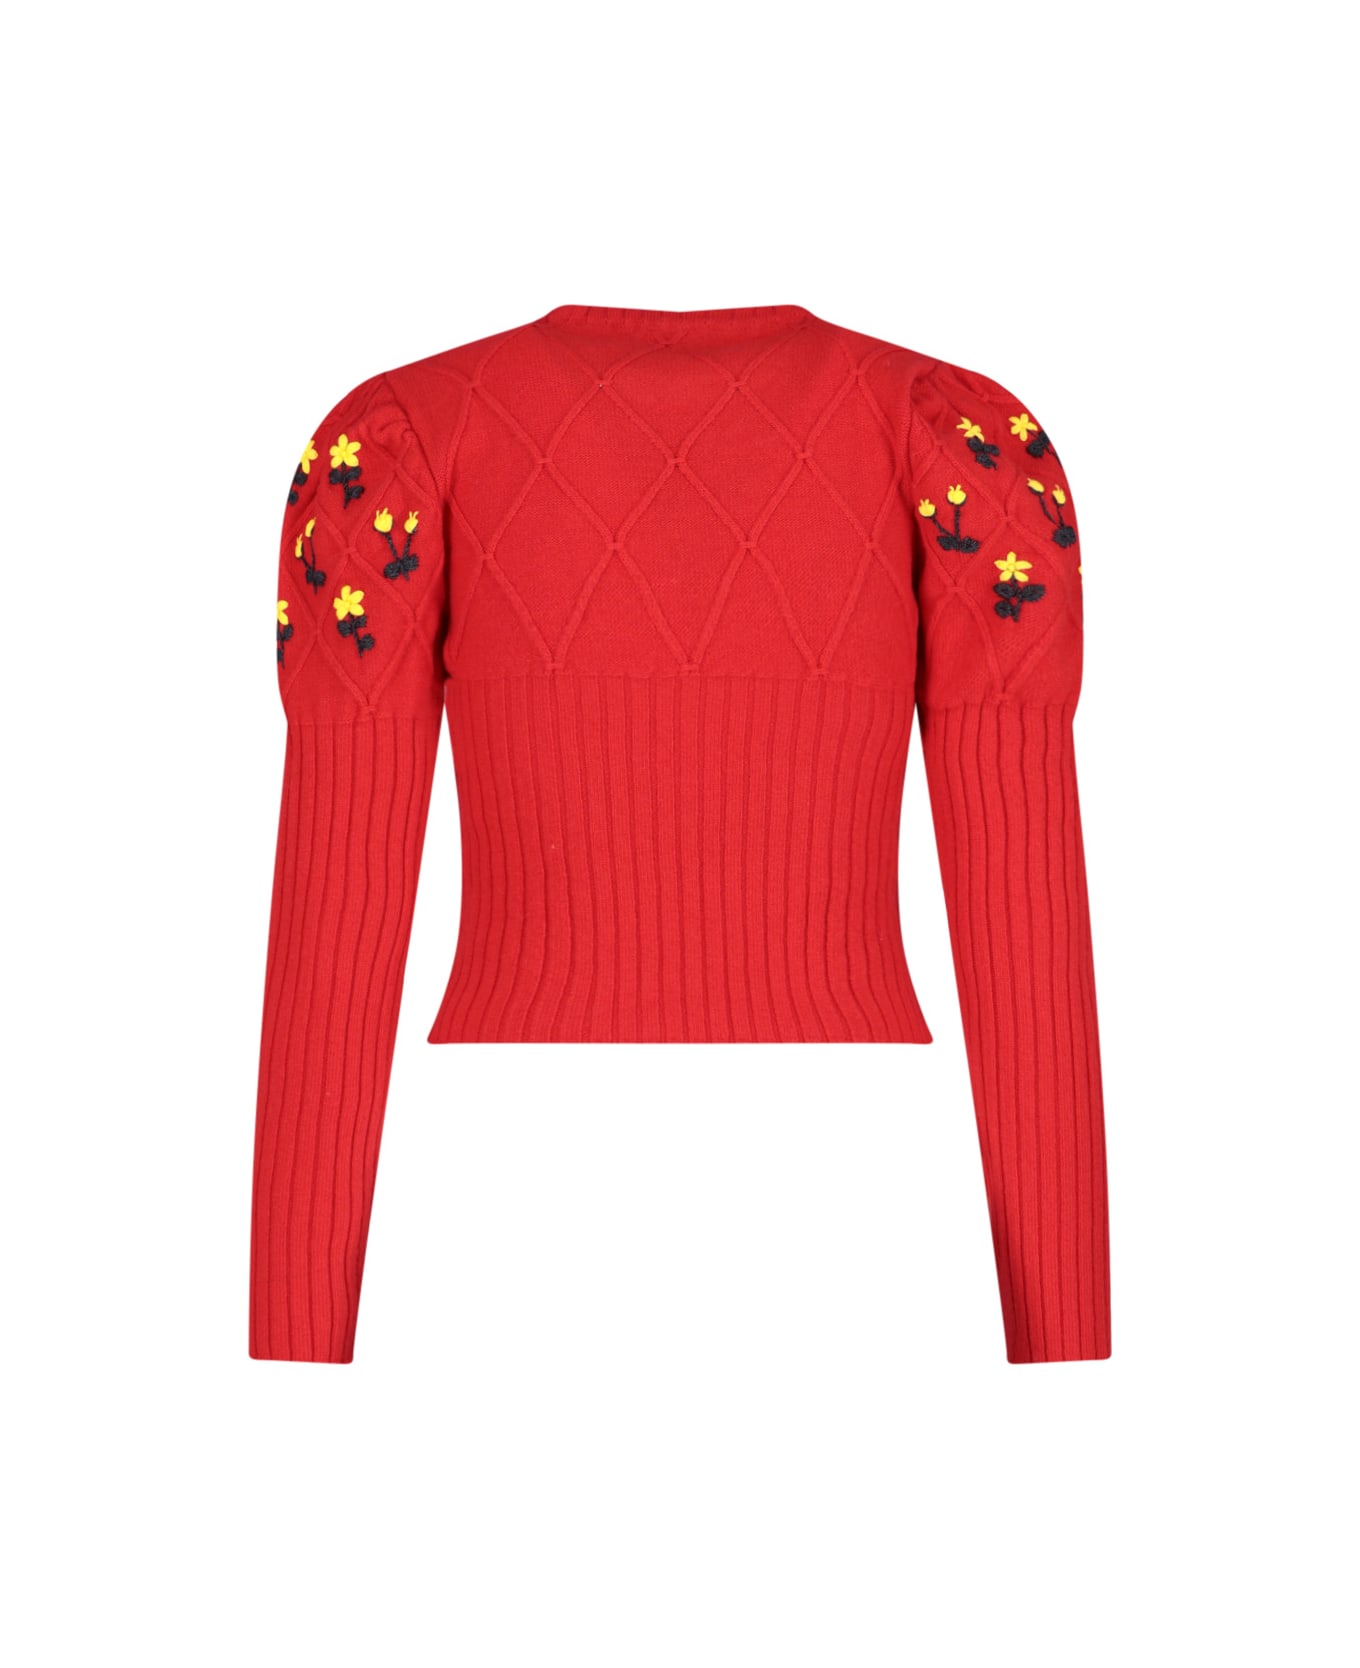 Cormio Sweater - Red